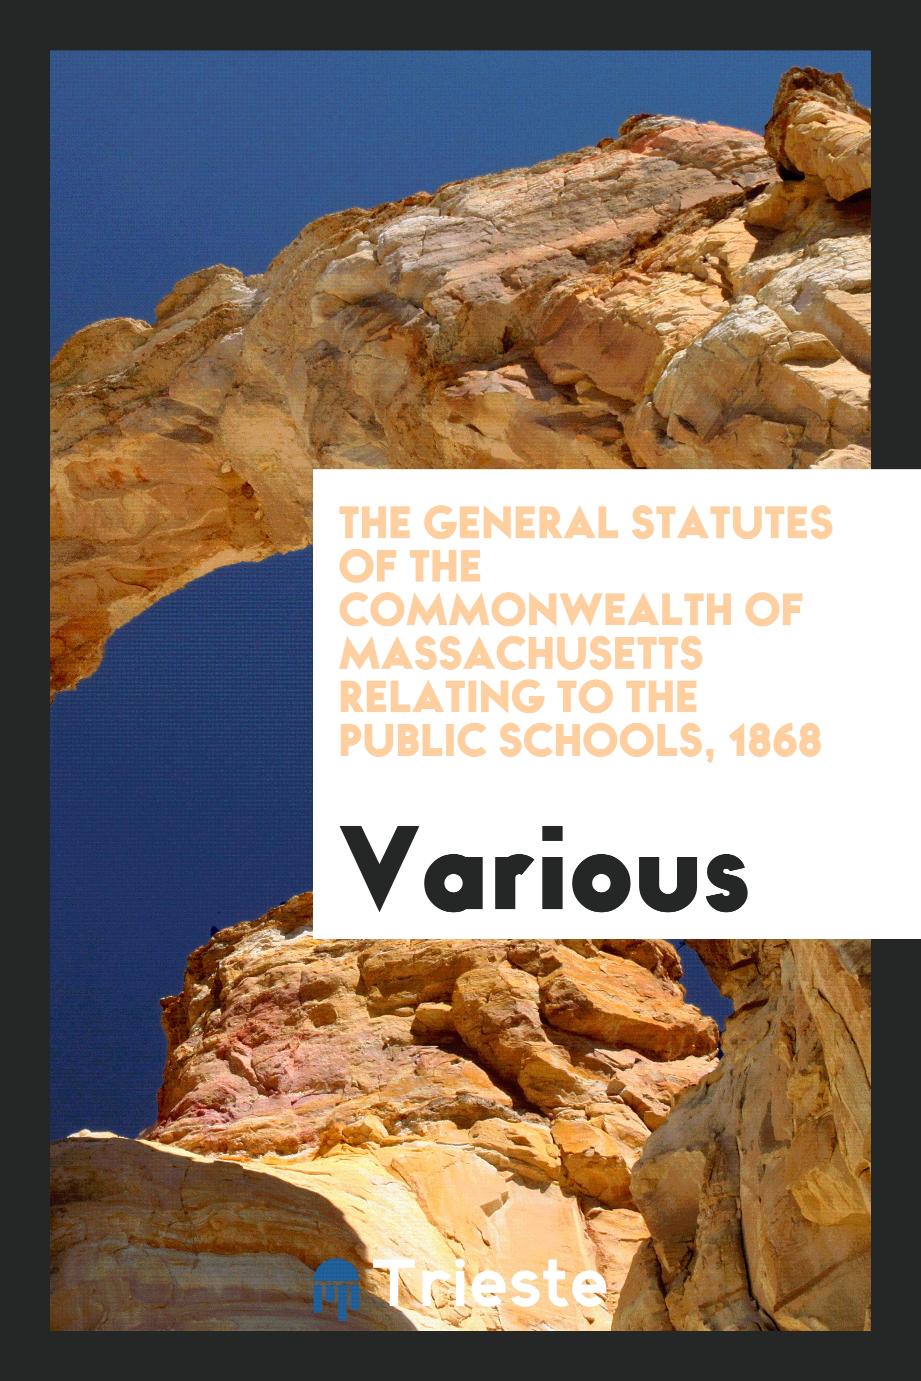 The General Statutes of the Commonwealth of Massachusetts Relating to the Public Schools, 1868